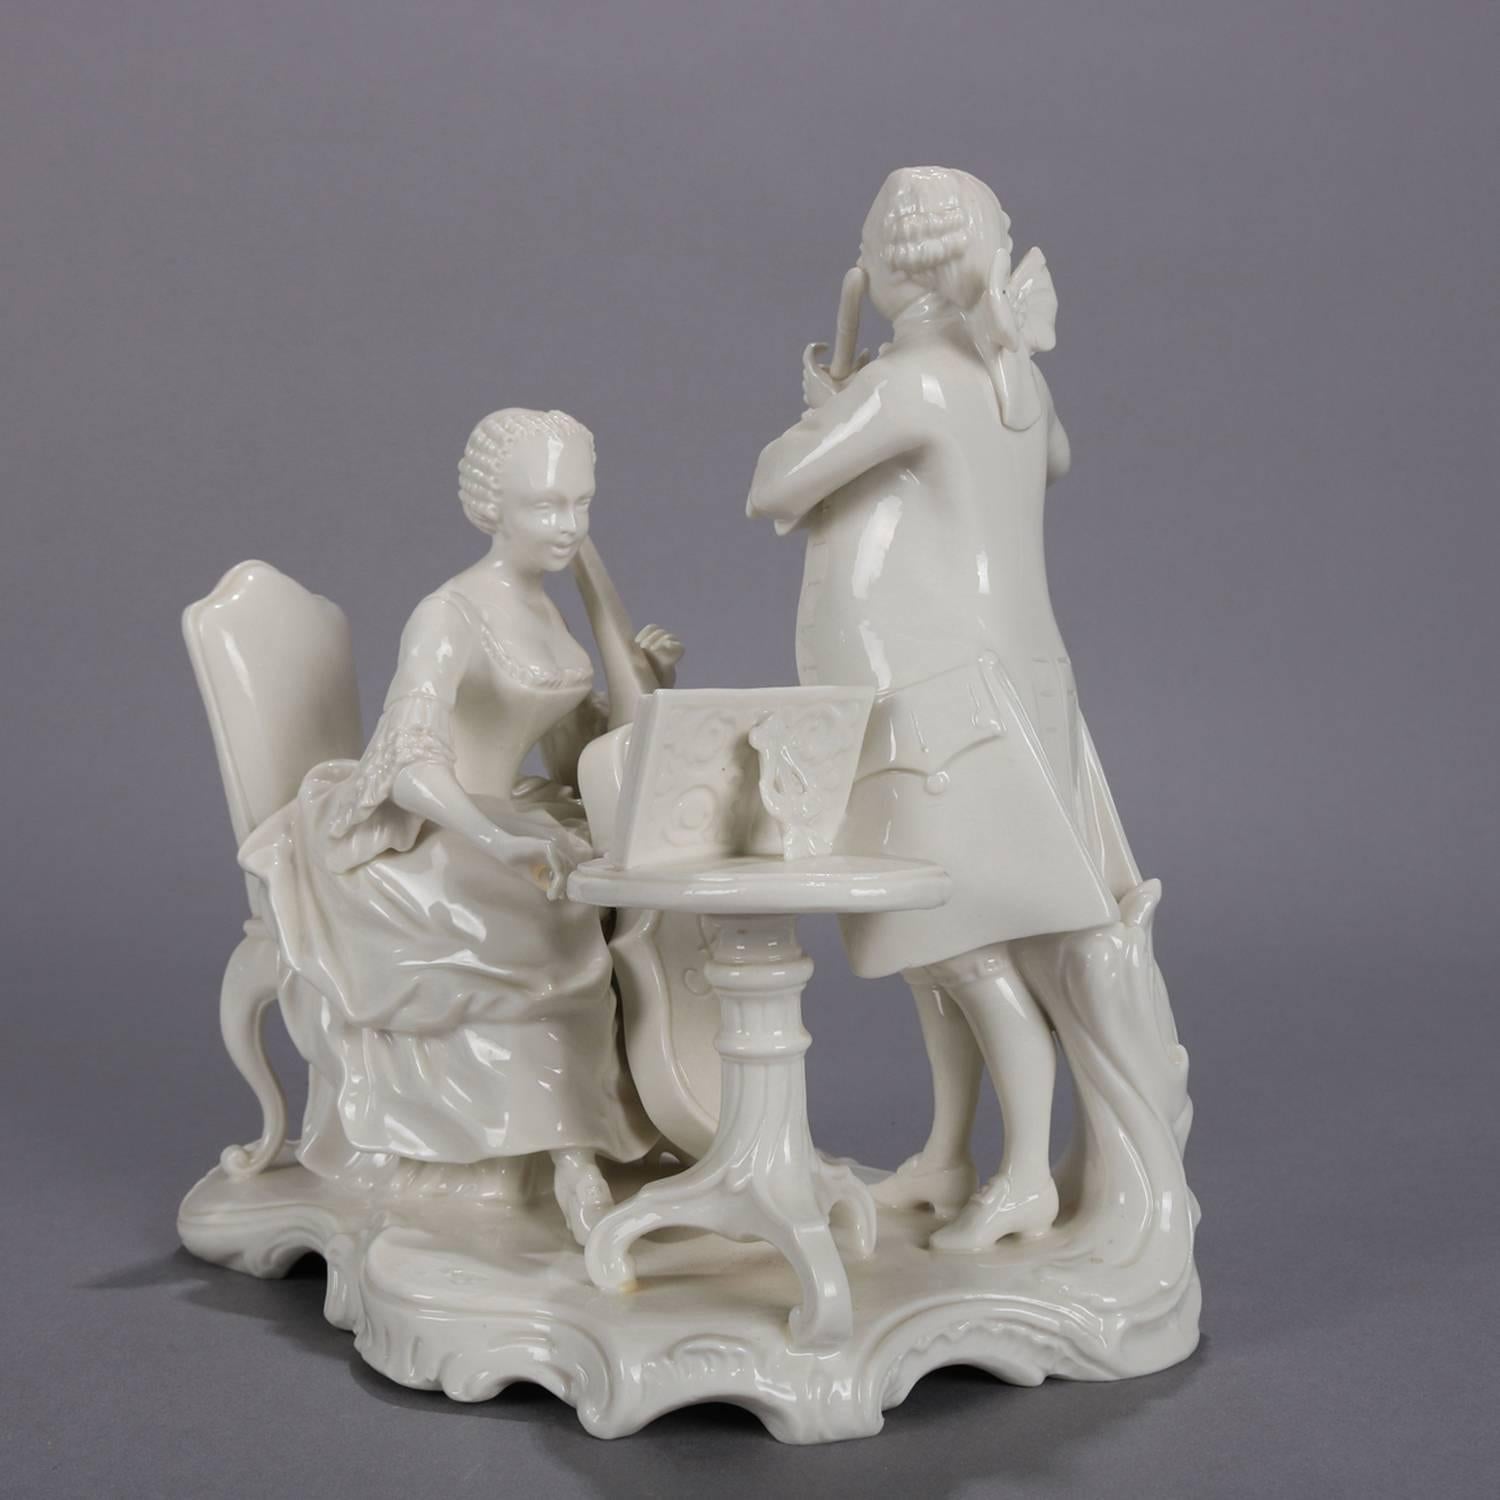 Rococo Blanc de Chine porcelain figural group features musicians including seated Cello payer and violinist on scroll and foliate from base, crown stamp on base, circa 1880.


Measures: 9